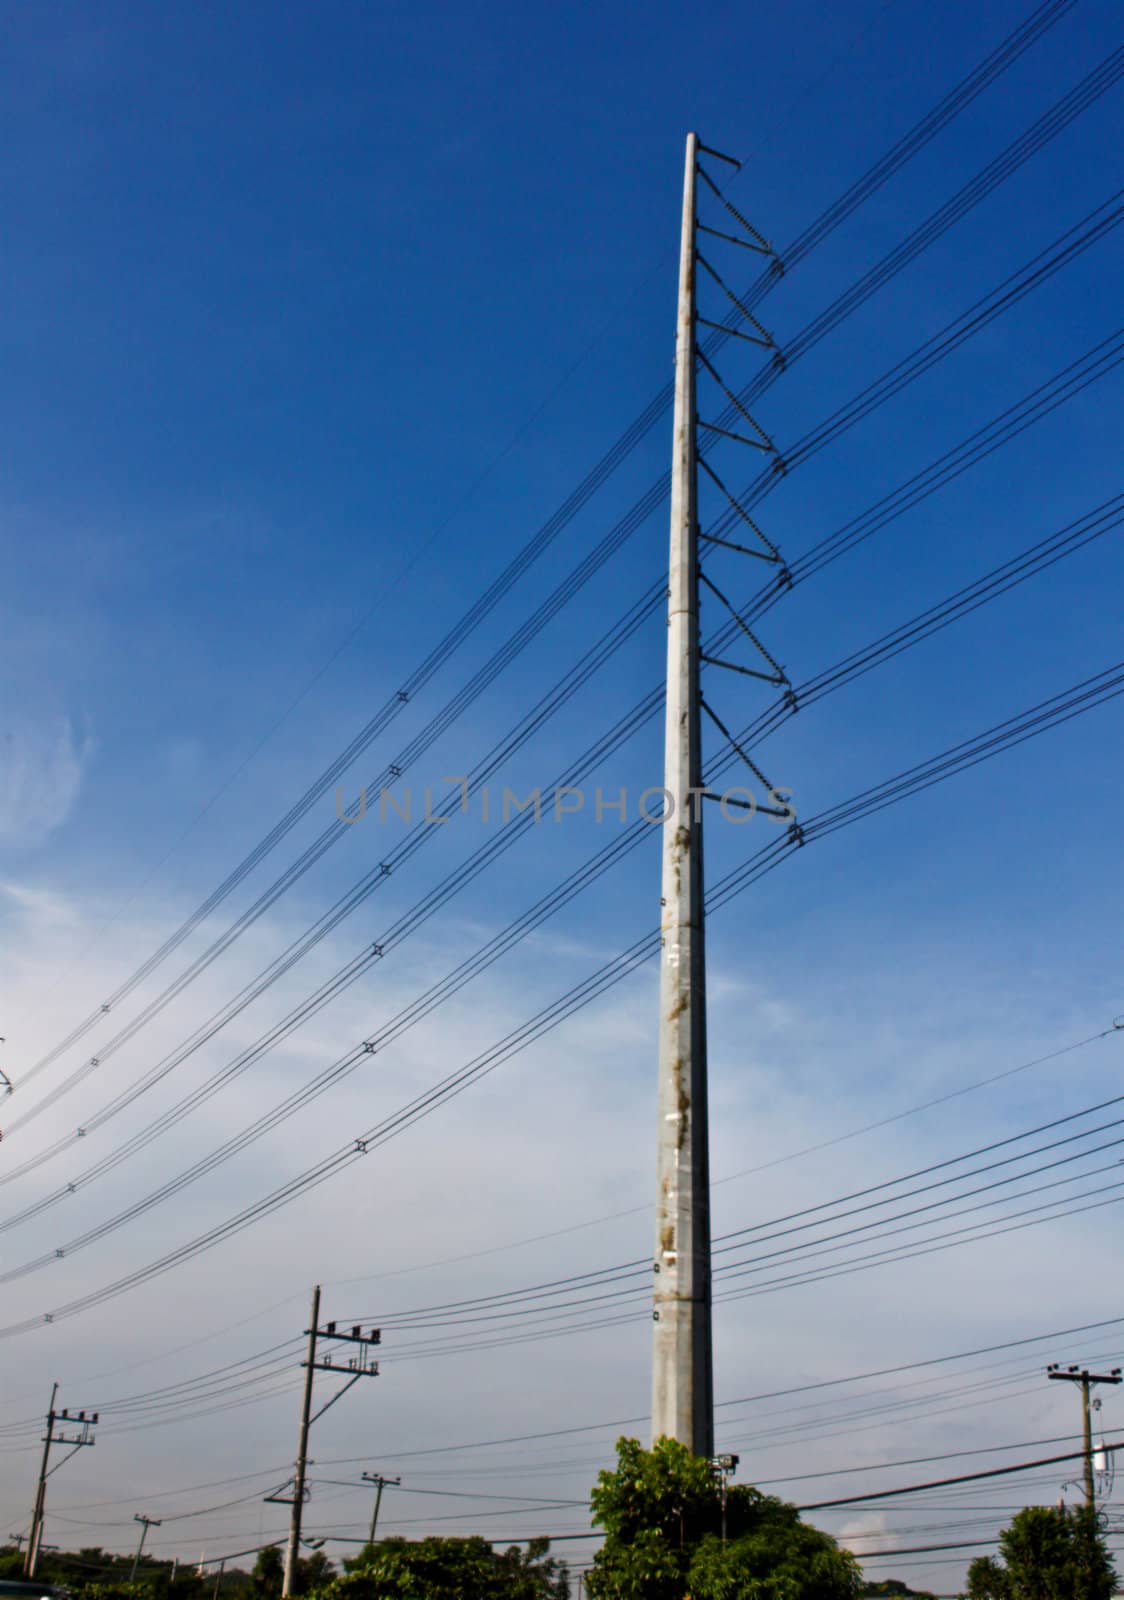 High and low metal posts with power line cables for electrical distributions to consumers.